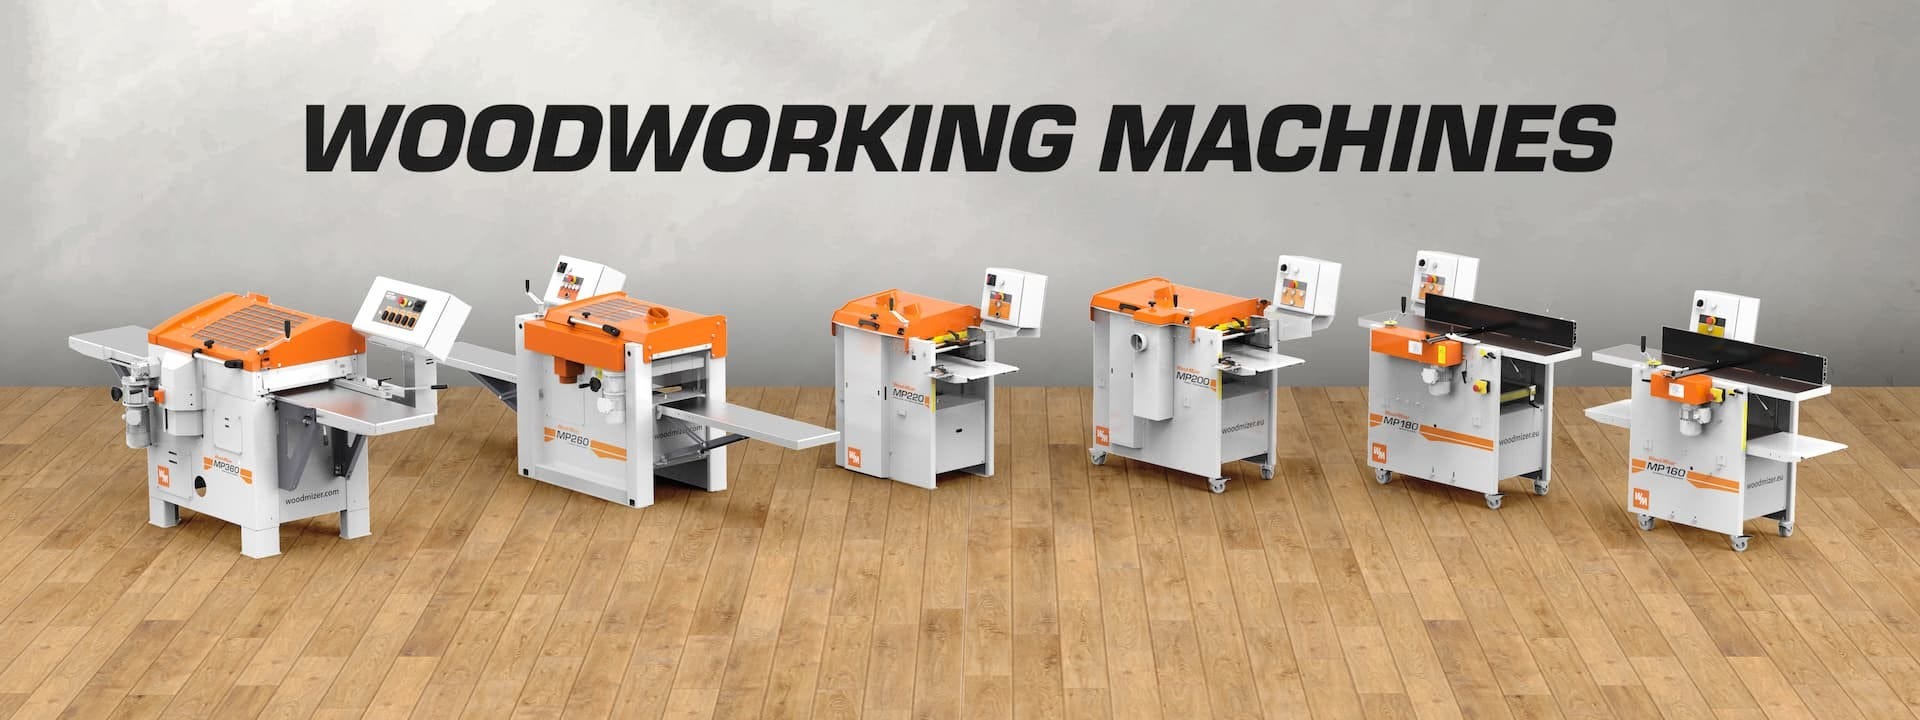 Woodworking Machines - range of products